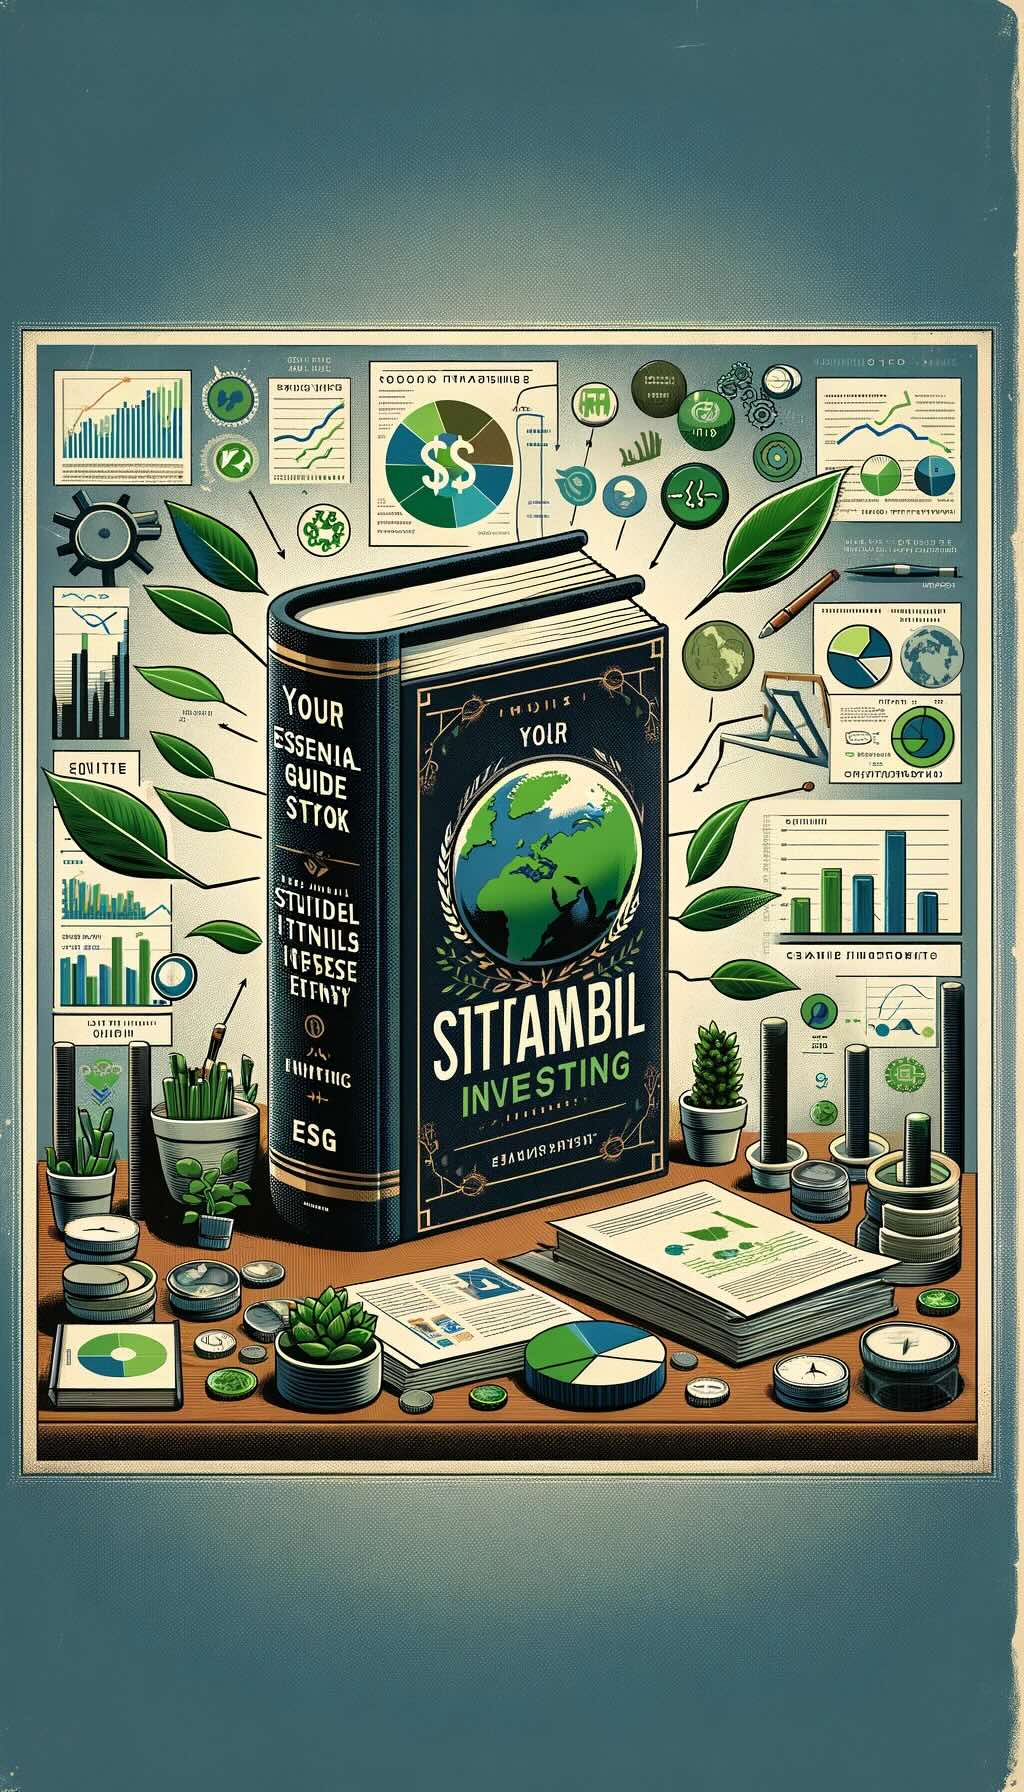 Essence of "Your Essential Guide to Sustainable Investing," reflecting the theme of sustainability